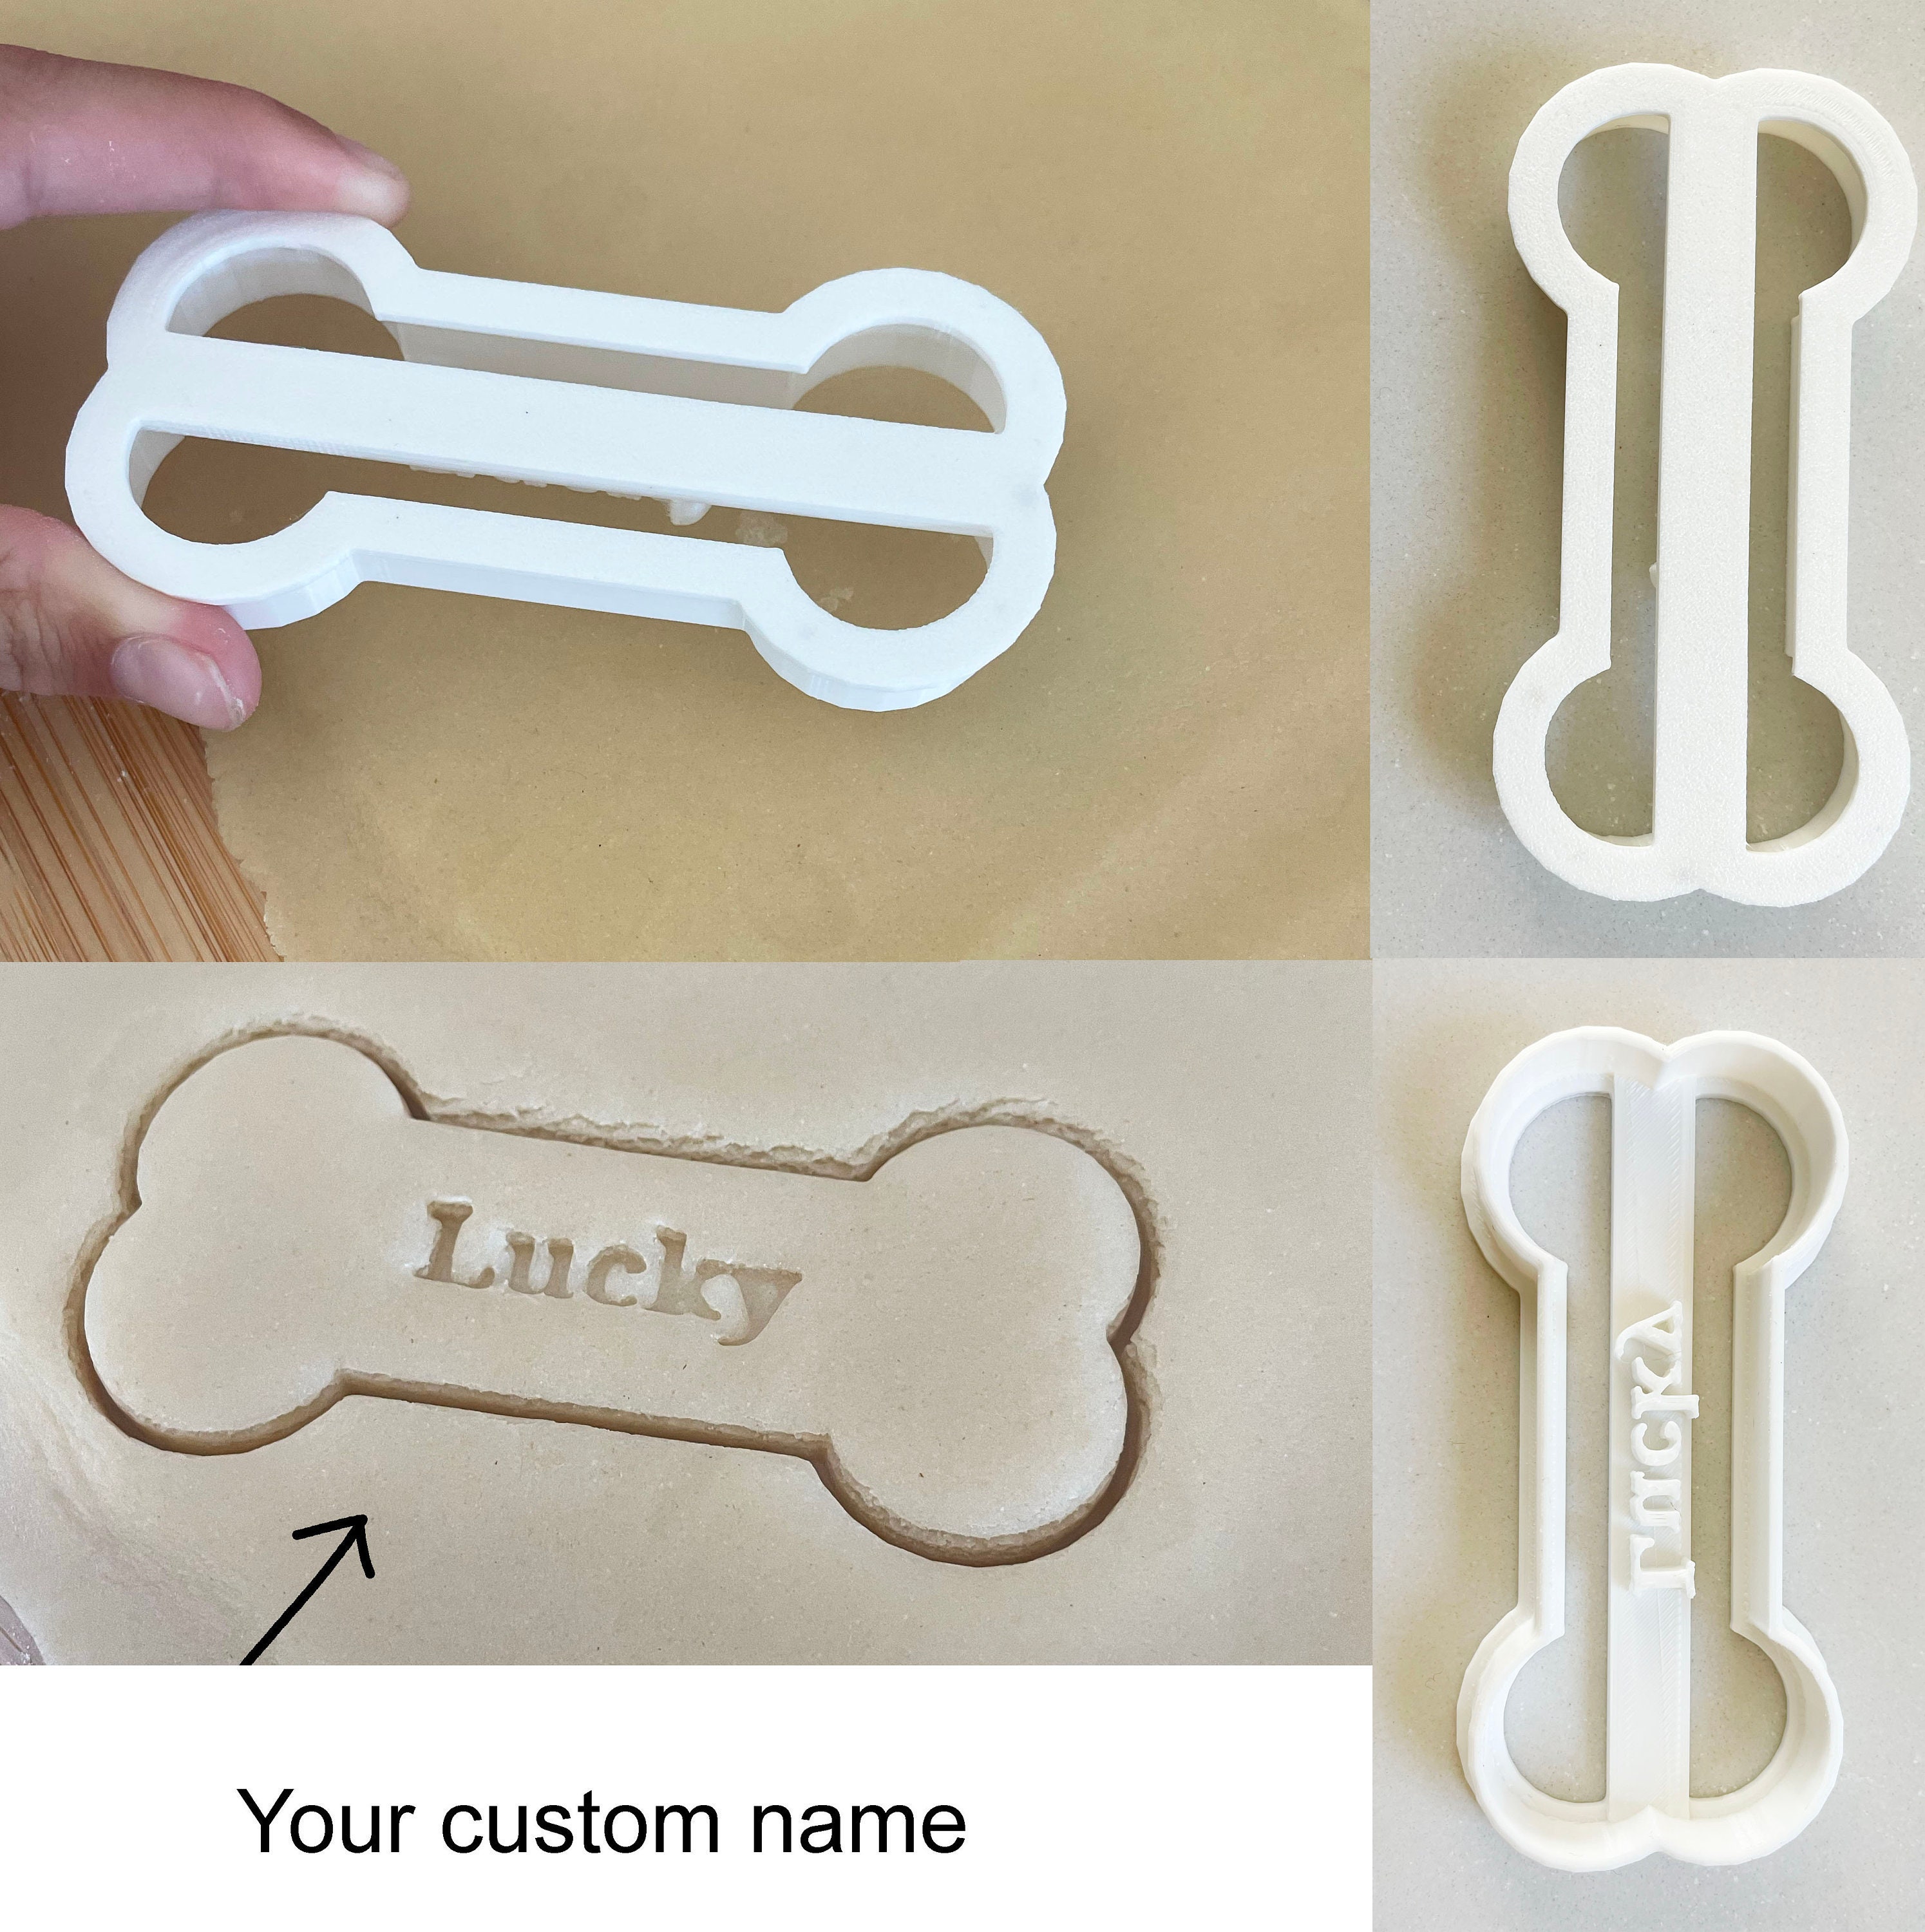 FREE Spatulas and FREE Shipping! The Sweet Stencil Holder Bundle, Get 2 of  the best Spatulas and a Cookie Scribe for Free, Stencil Holder